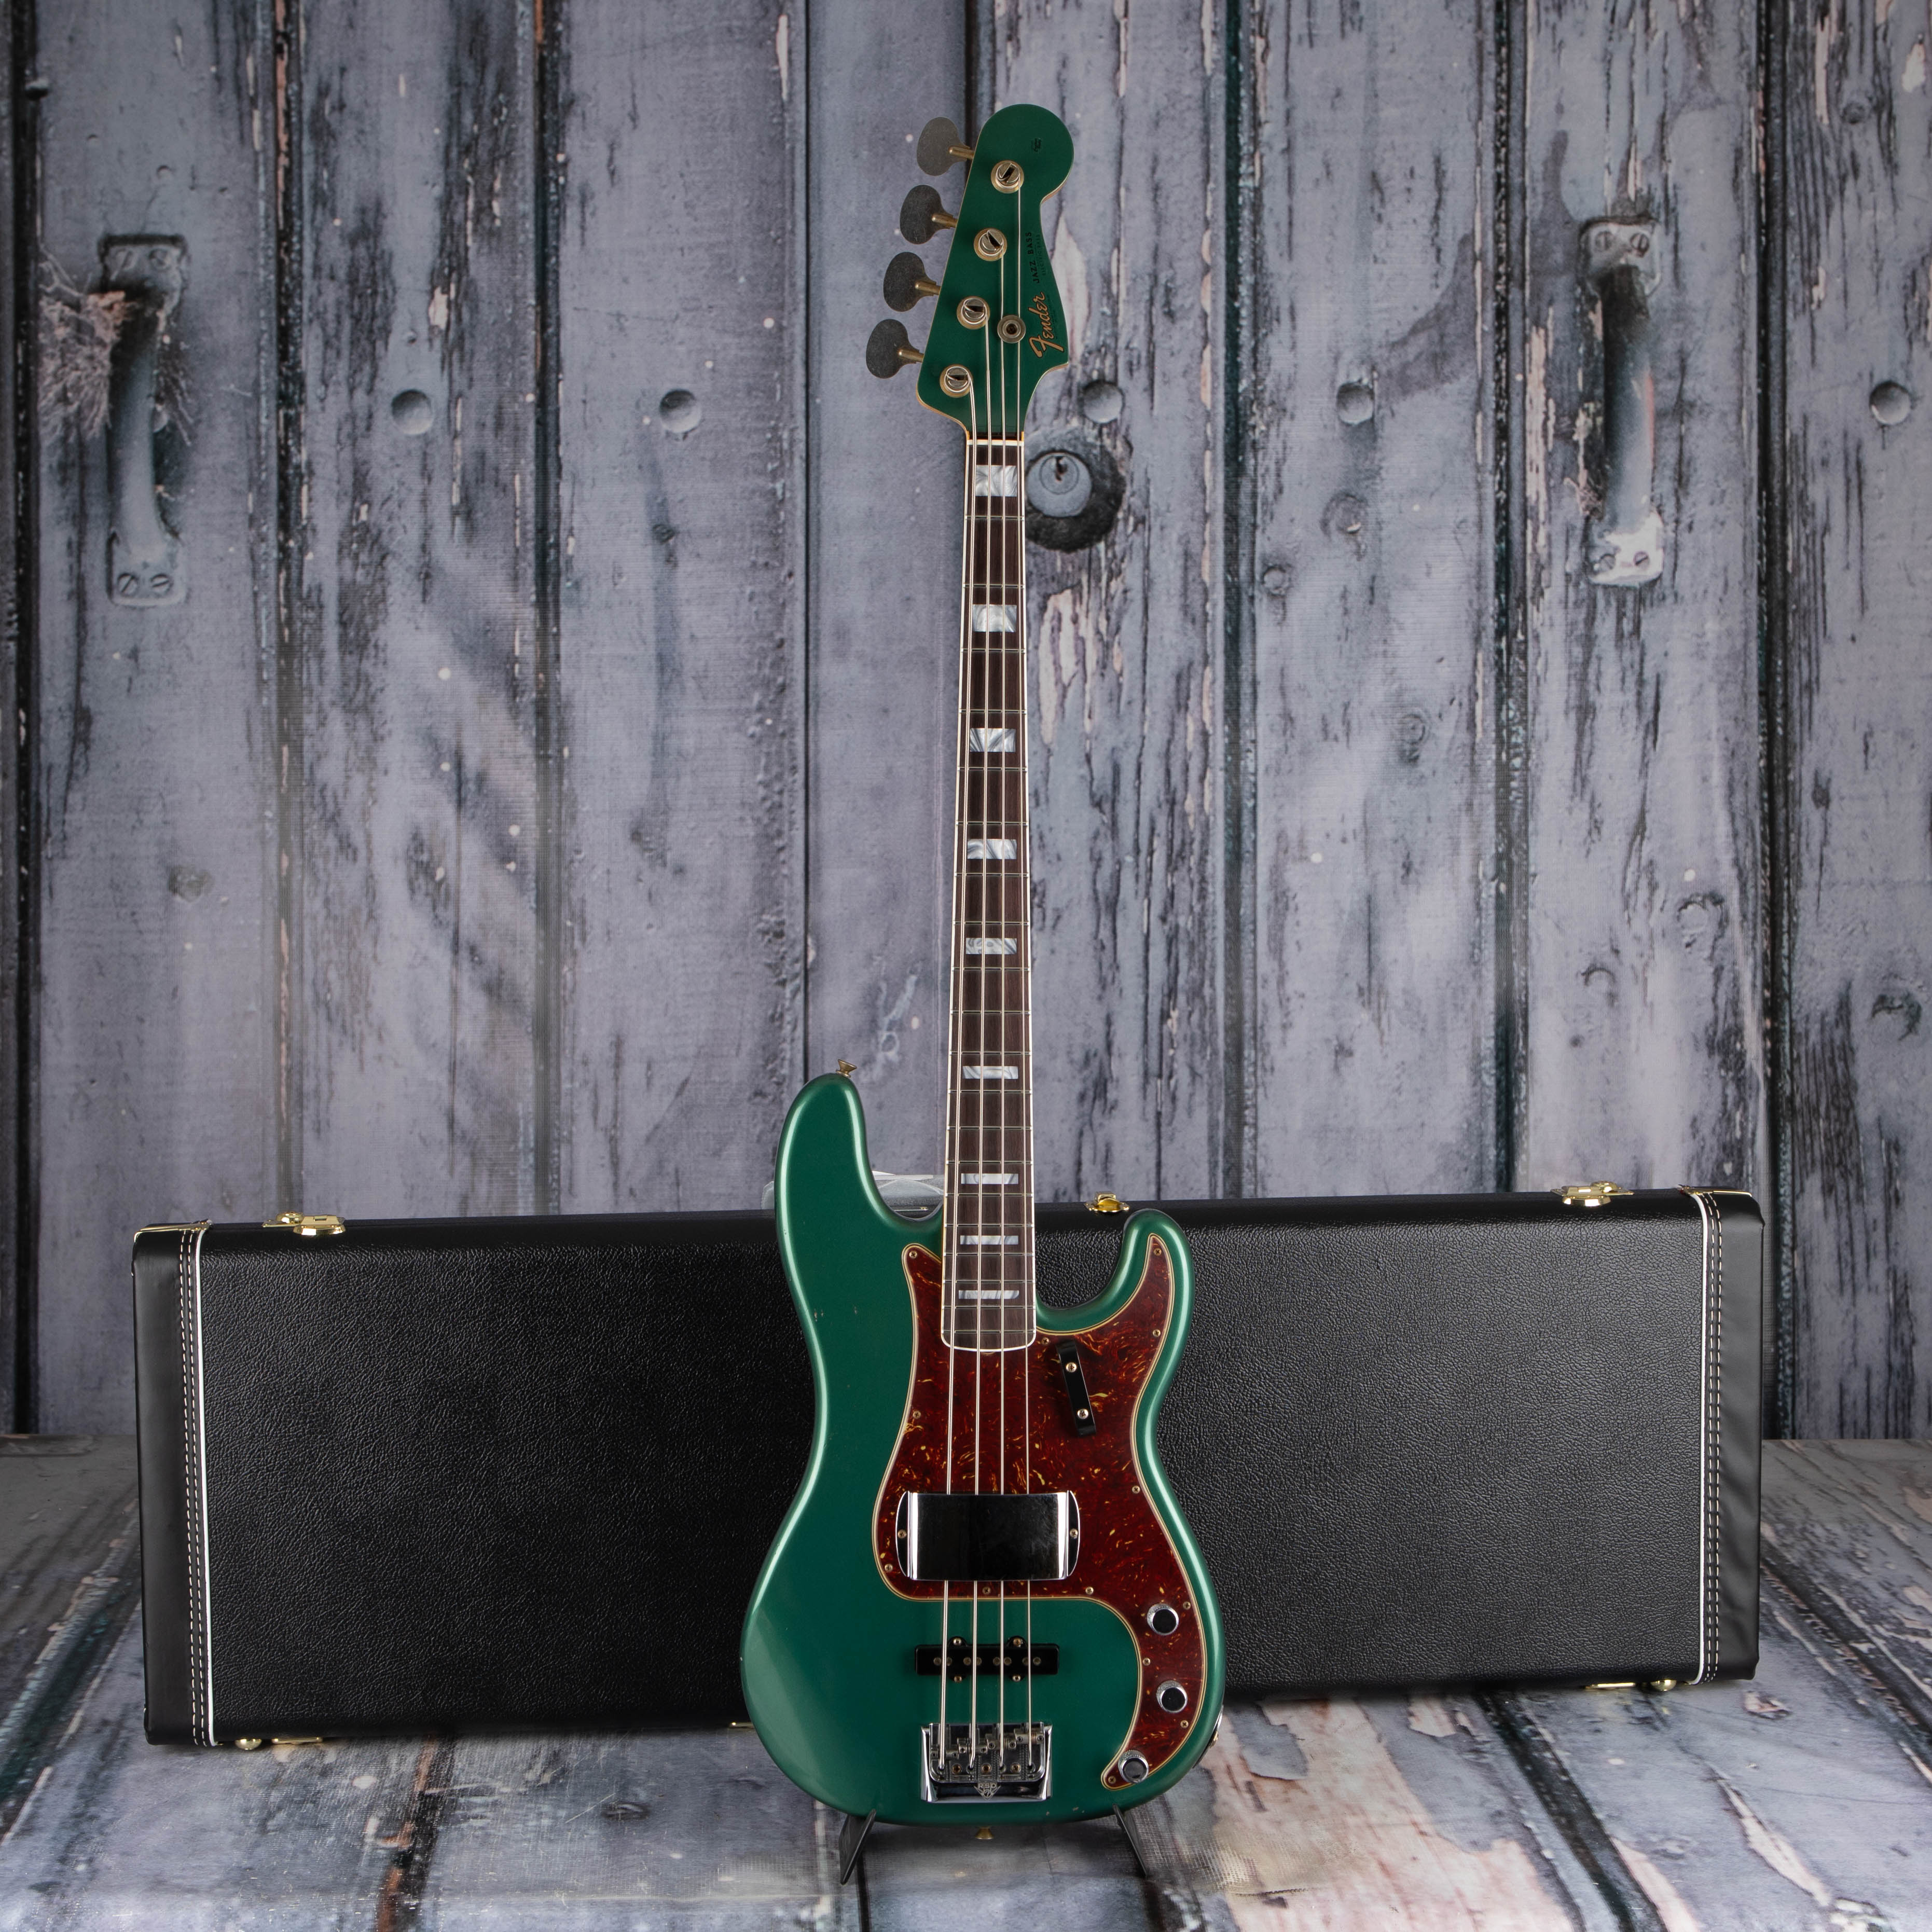 Fender Custom Shop Limited Edition Precision Bass Special Journeyman Relic Electric Bass Guitar, Aged Sherwood Green Metallic, case